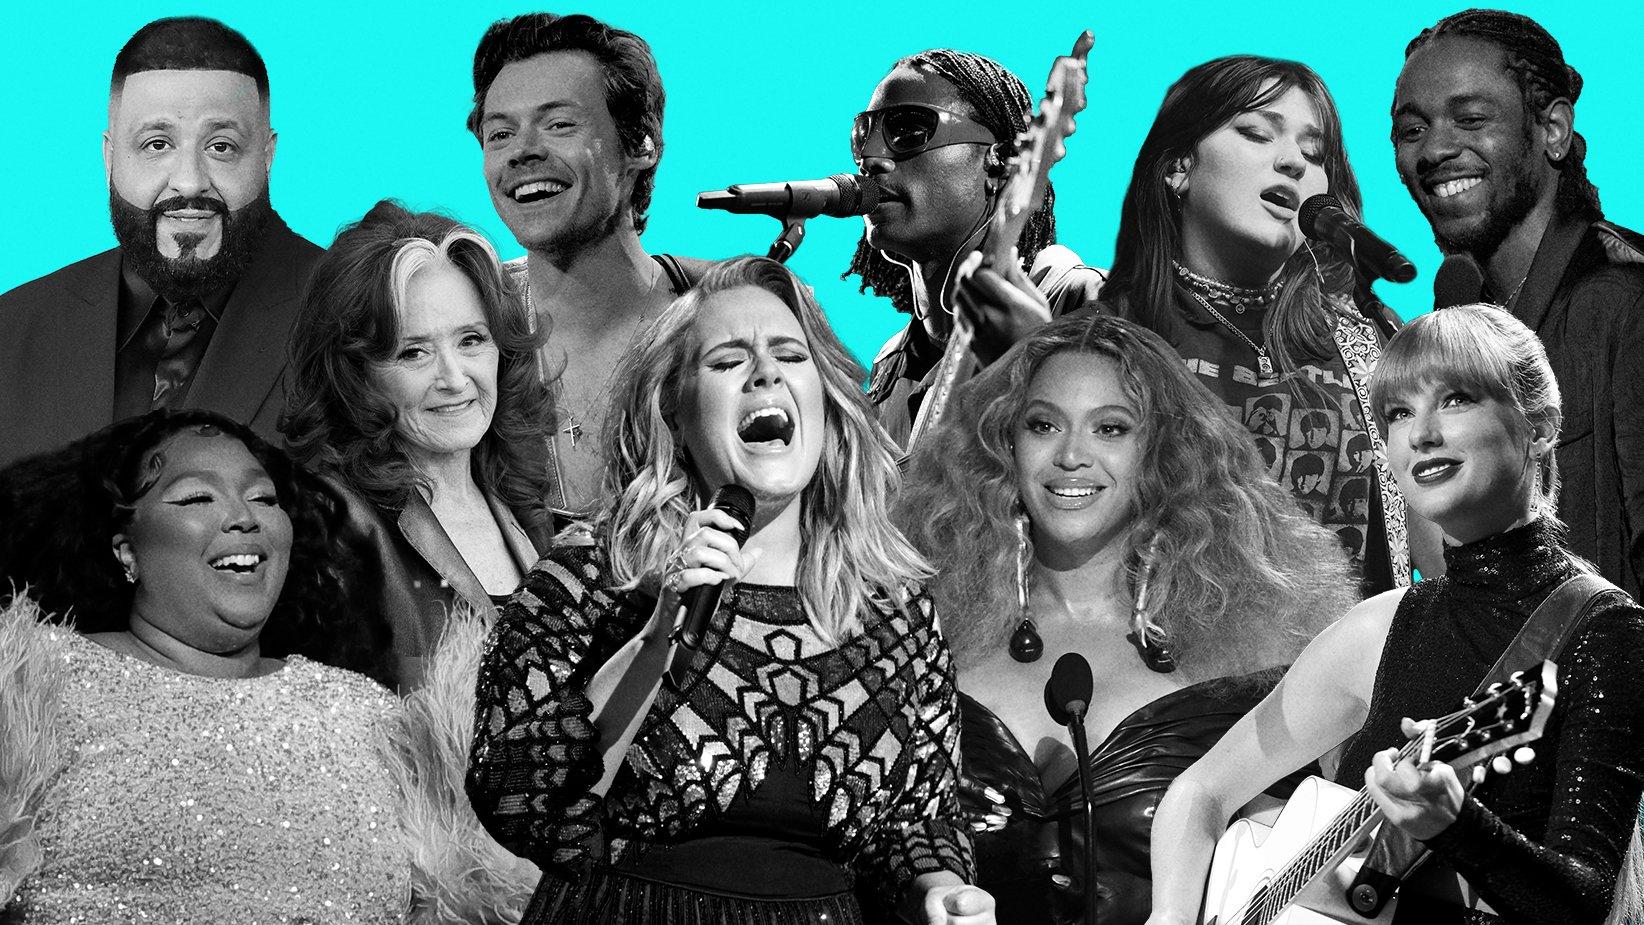 A Look At The Nominees For Song Of The Year At The 2023 GRAMMY Awards GRAMMY photo